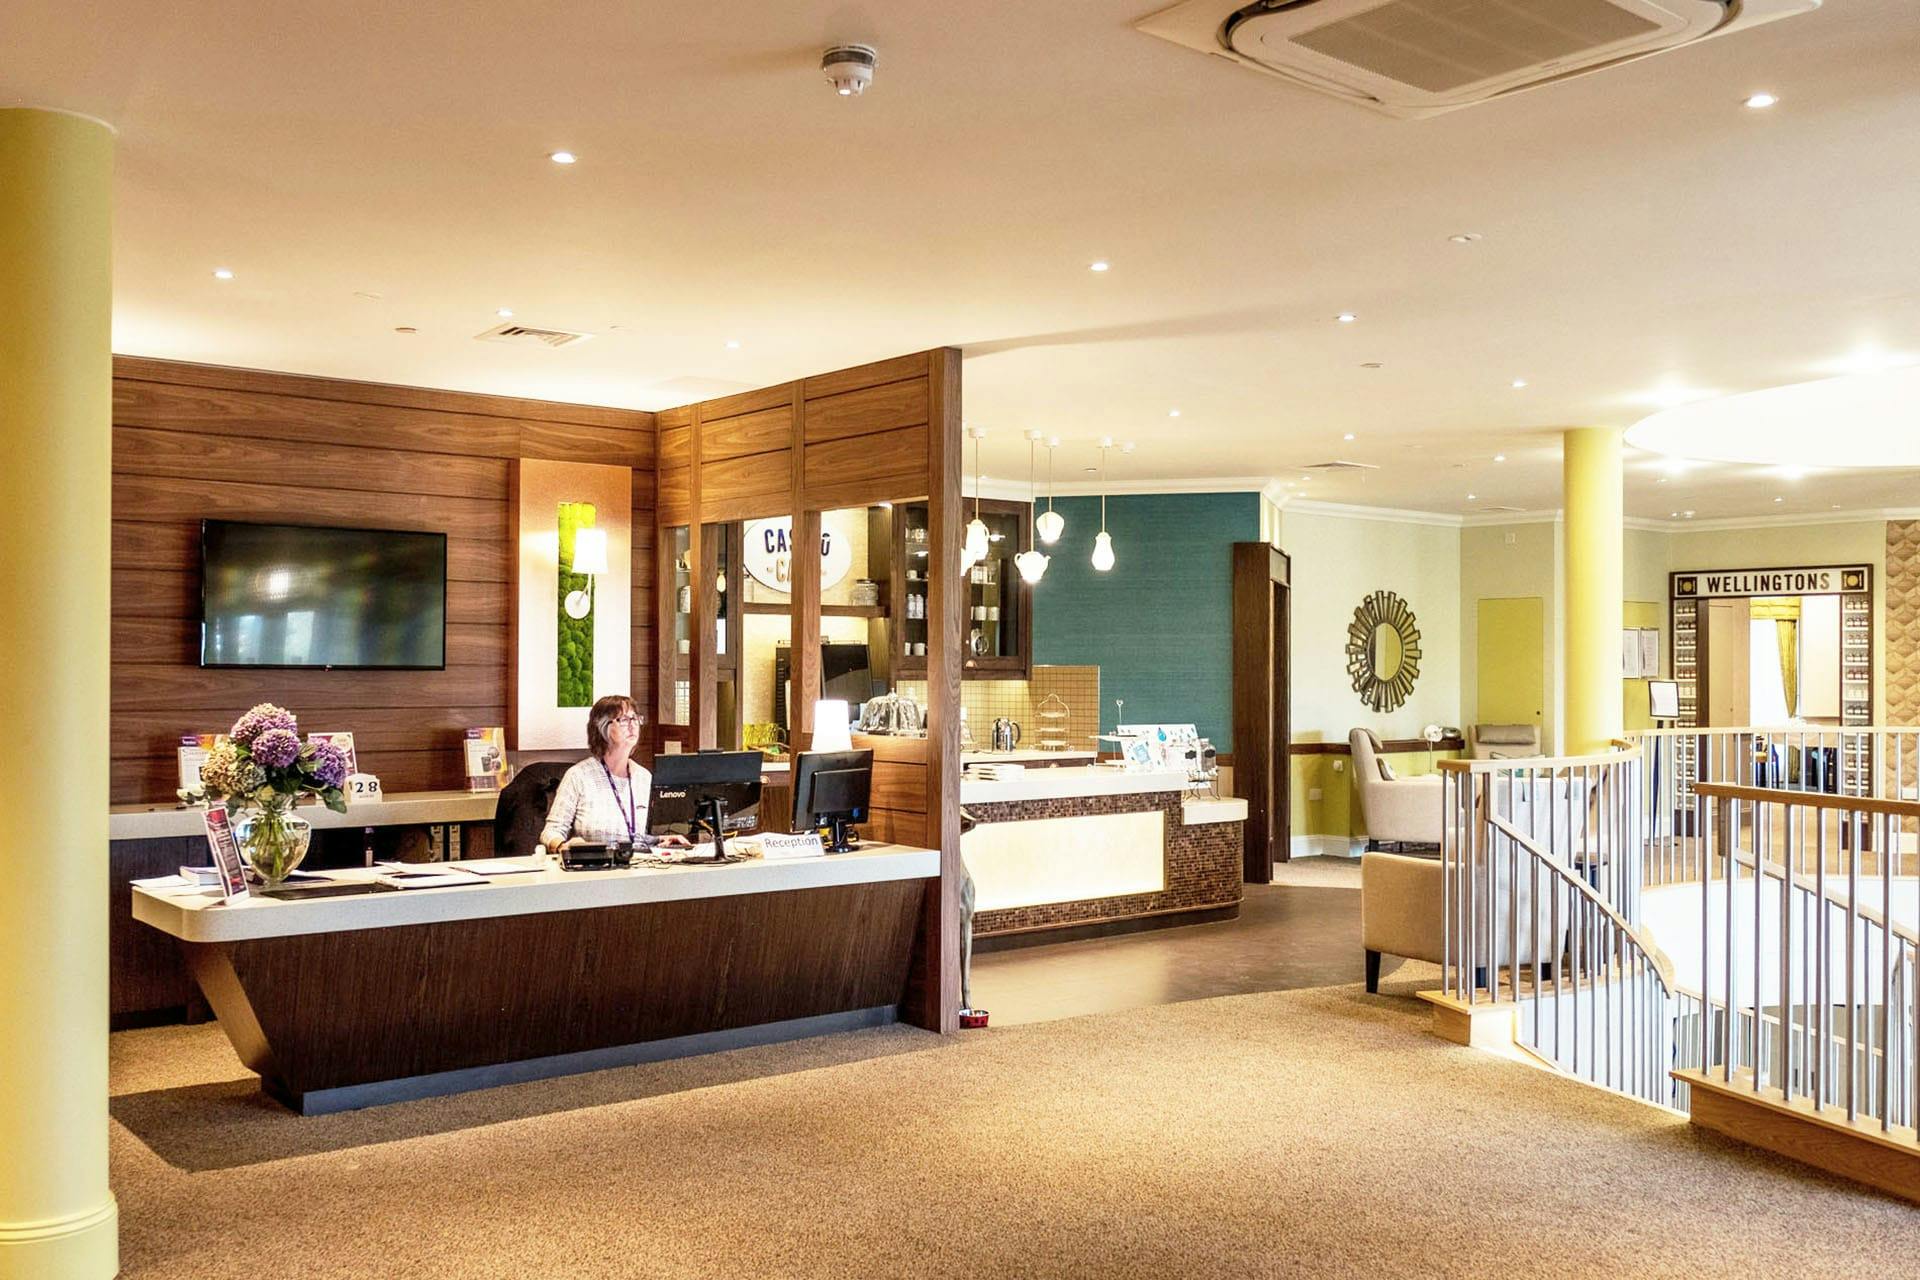 Reception of Elton House care home in Bushey, Hertfordshire